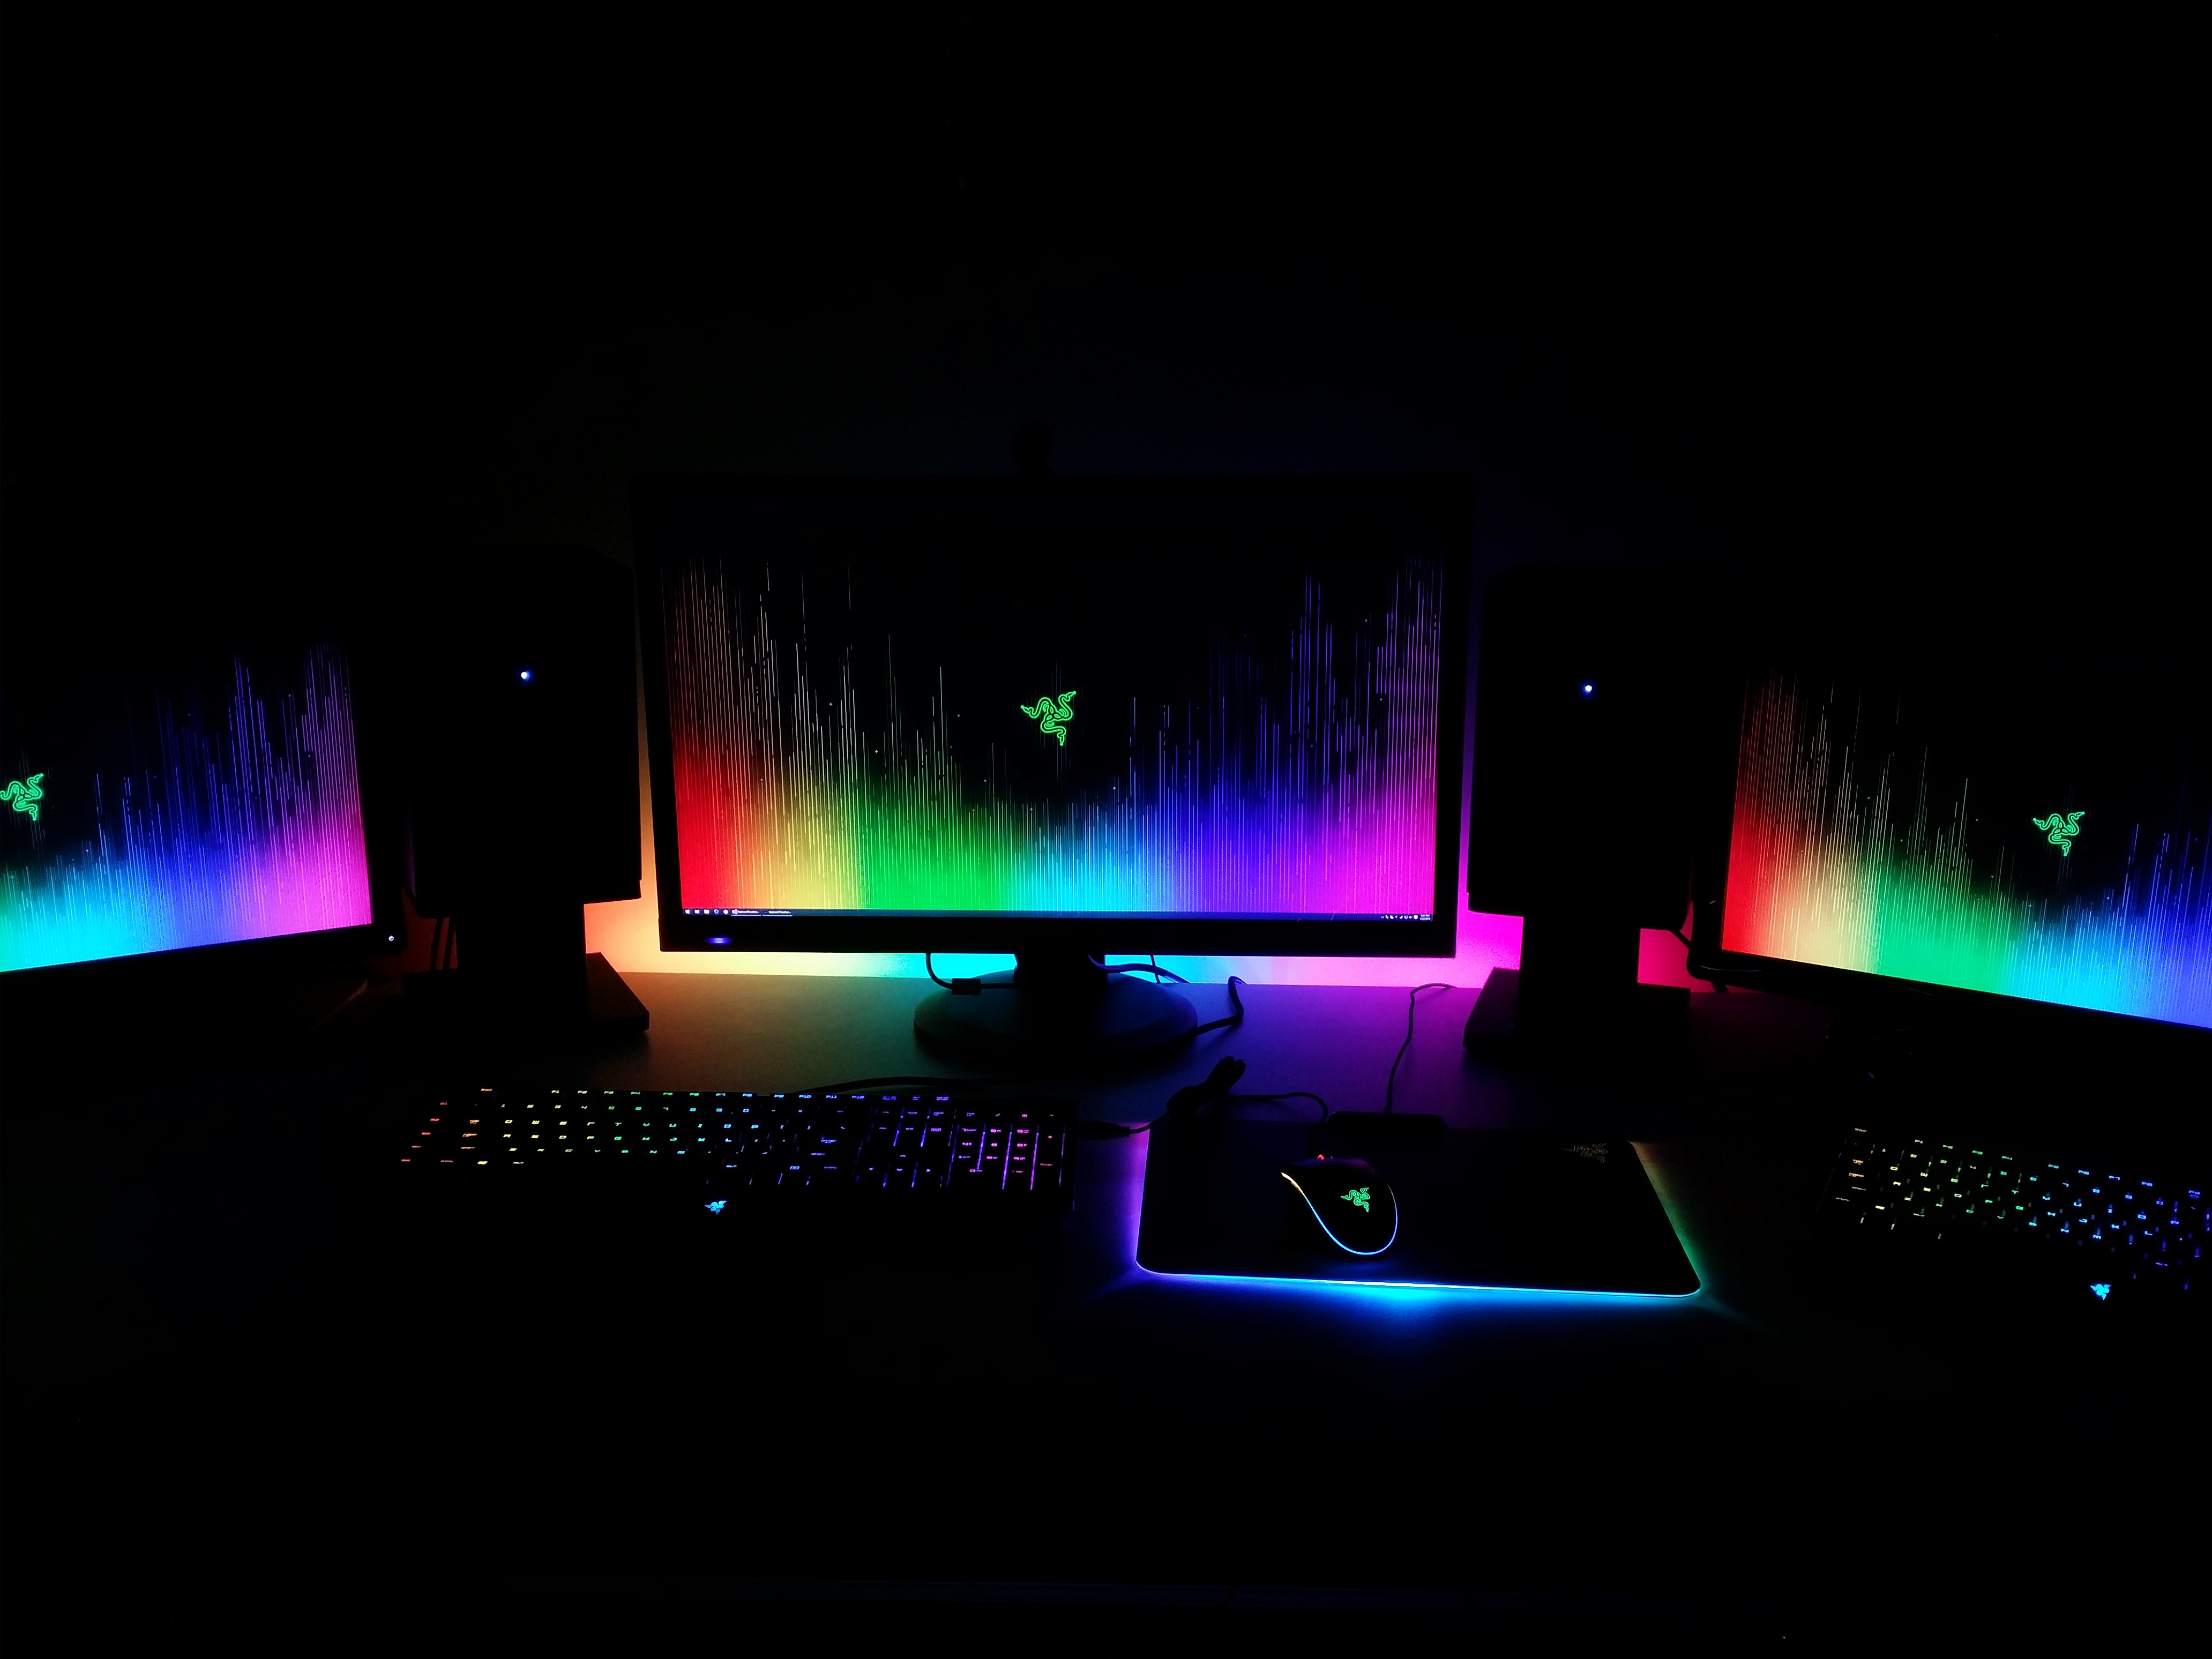 Heres my Chroma setup to go along with the new wallpaper razer 4128x3096